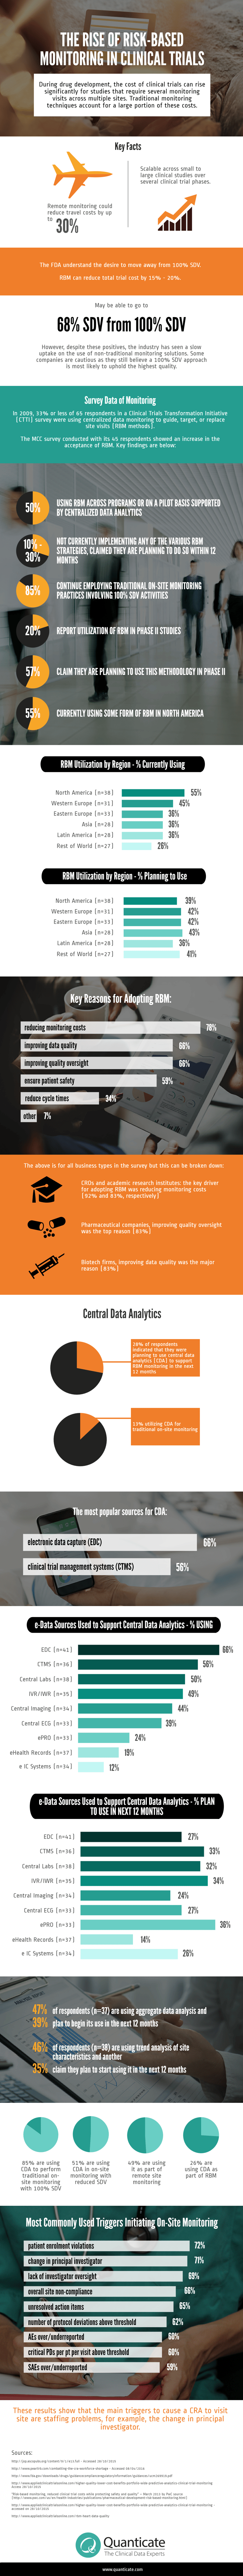 The_Rise_of_Risk_Based_Monitoring_in_Clinical_Trials_Infographic.png